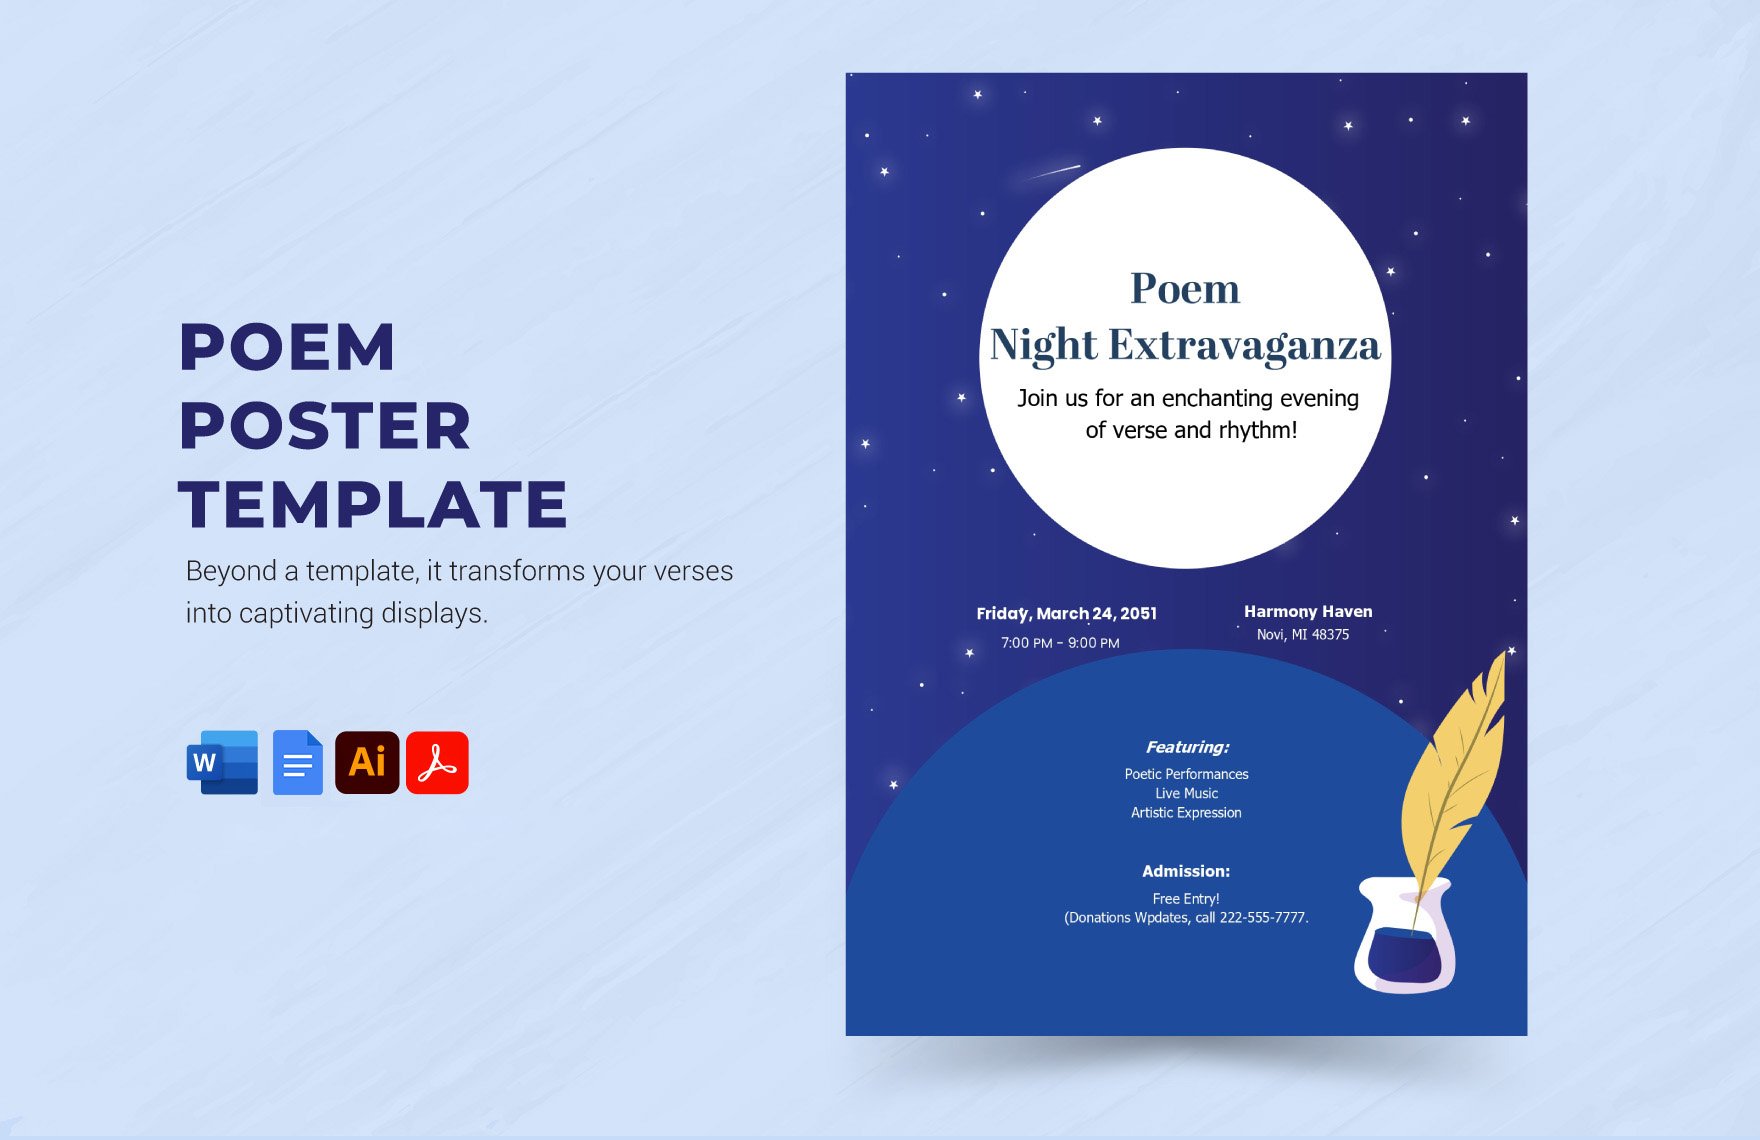 Poem Poster Template